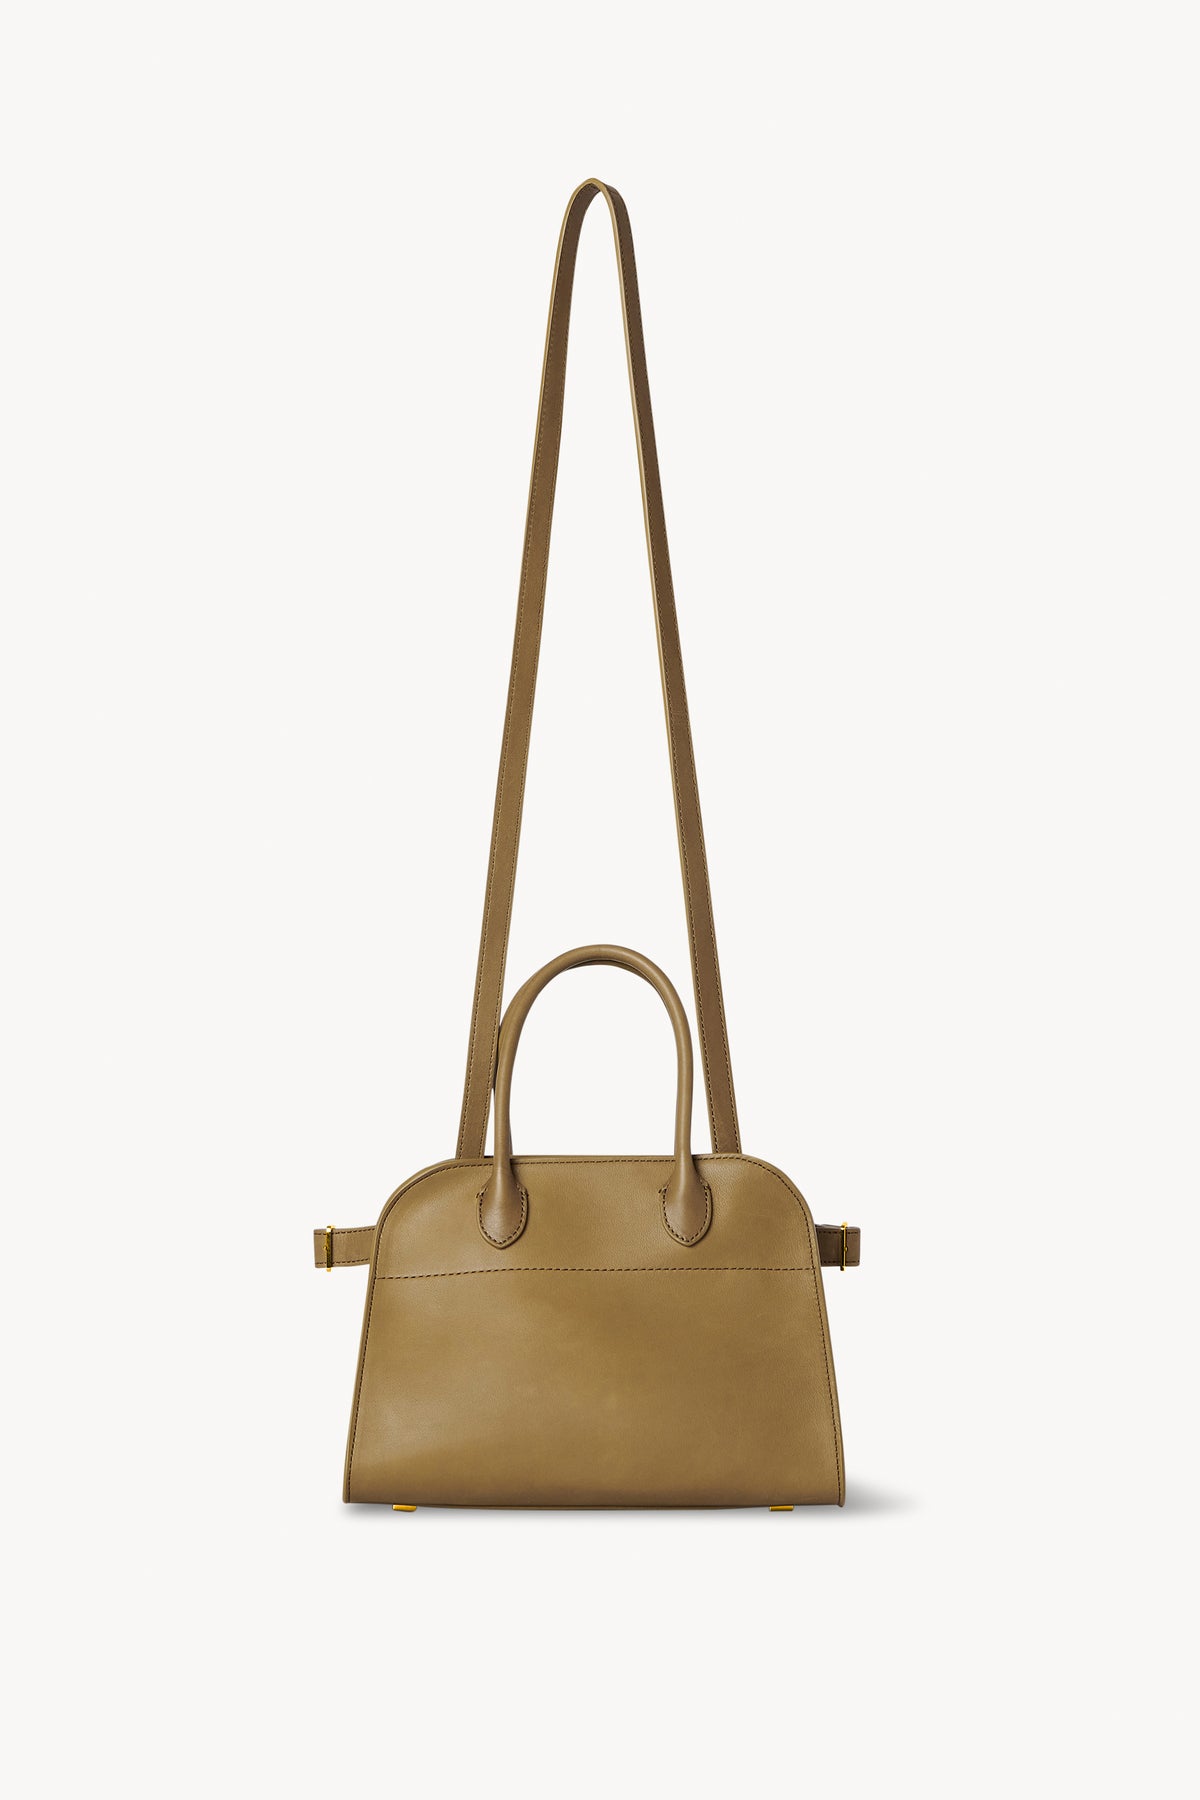 The Row Soft Margaux 17 Top Handle Bag in Cuir SHG